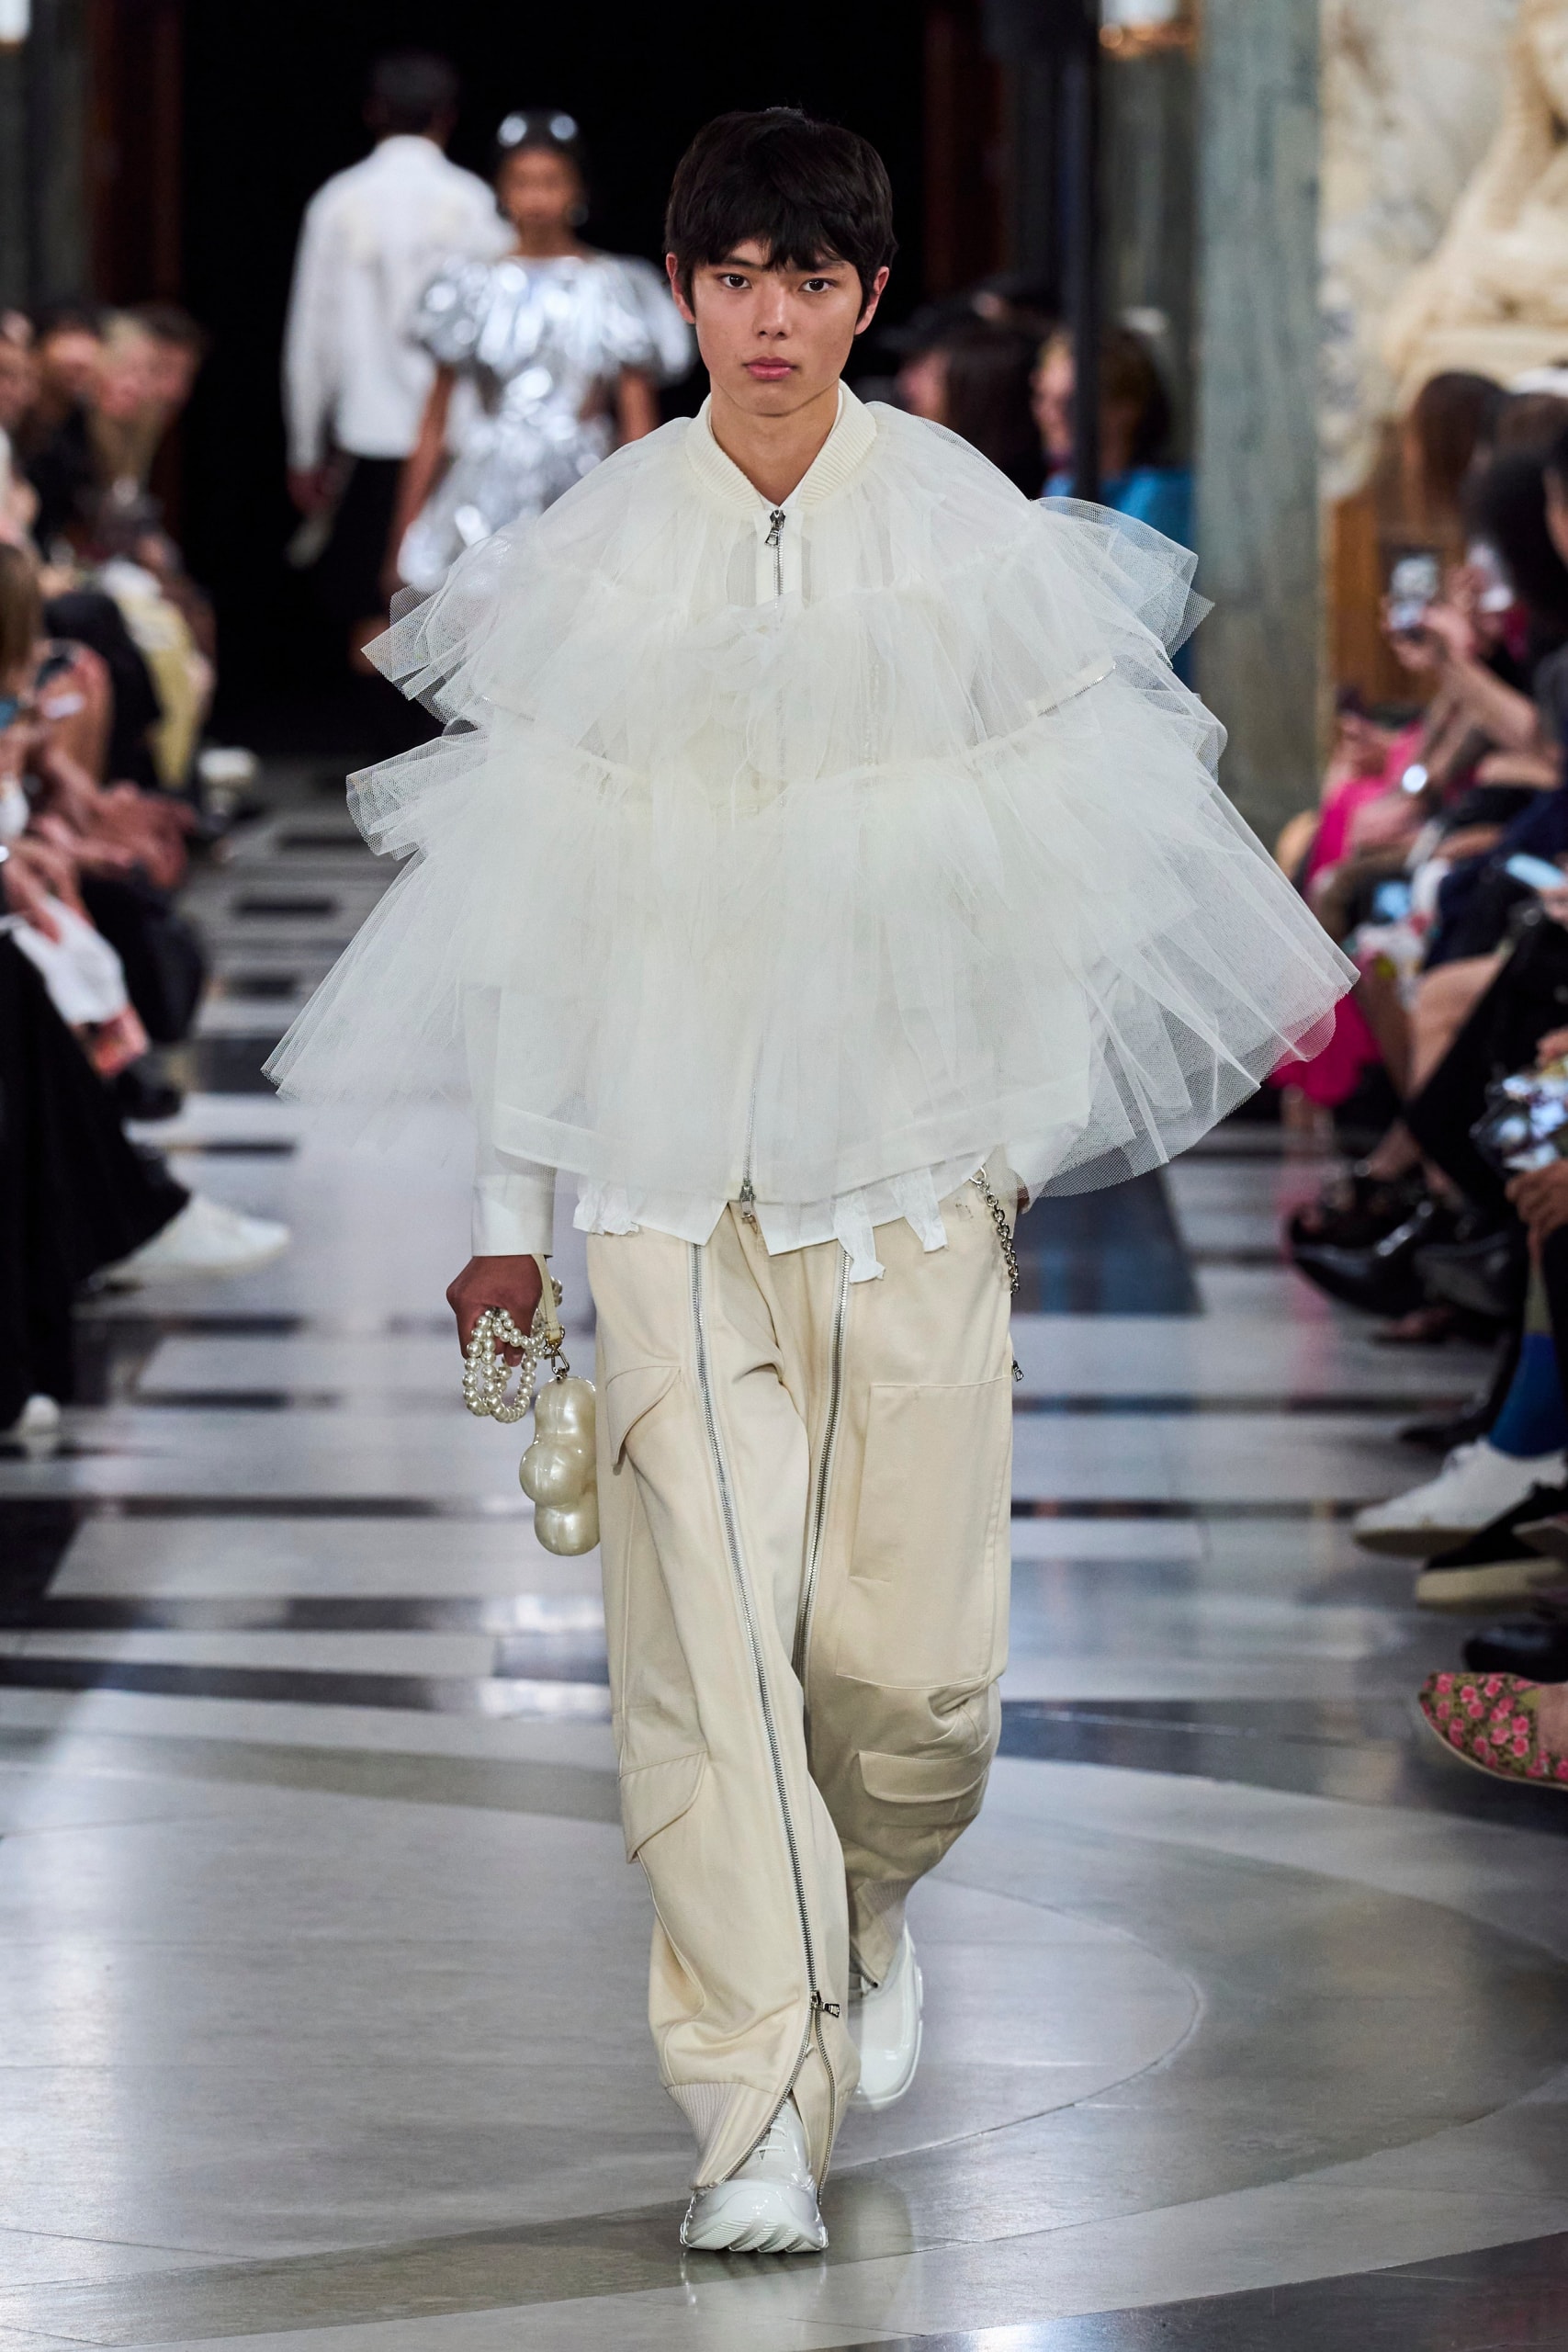 Simone Rocha debuts first fully-formed menswear collection at LFW